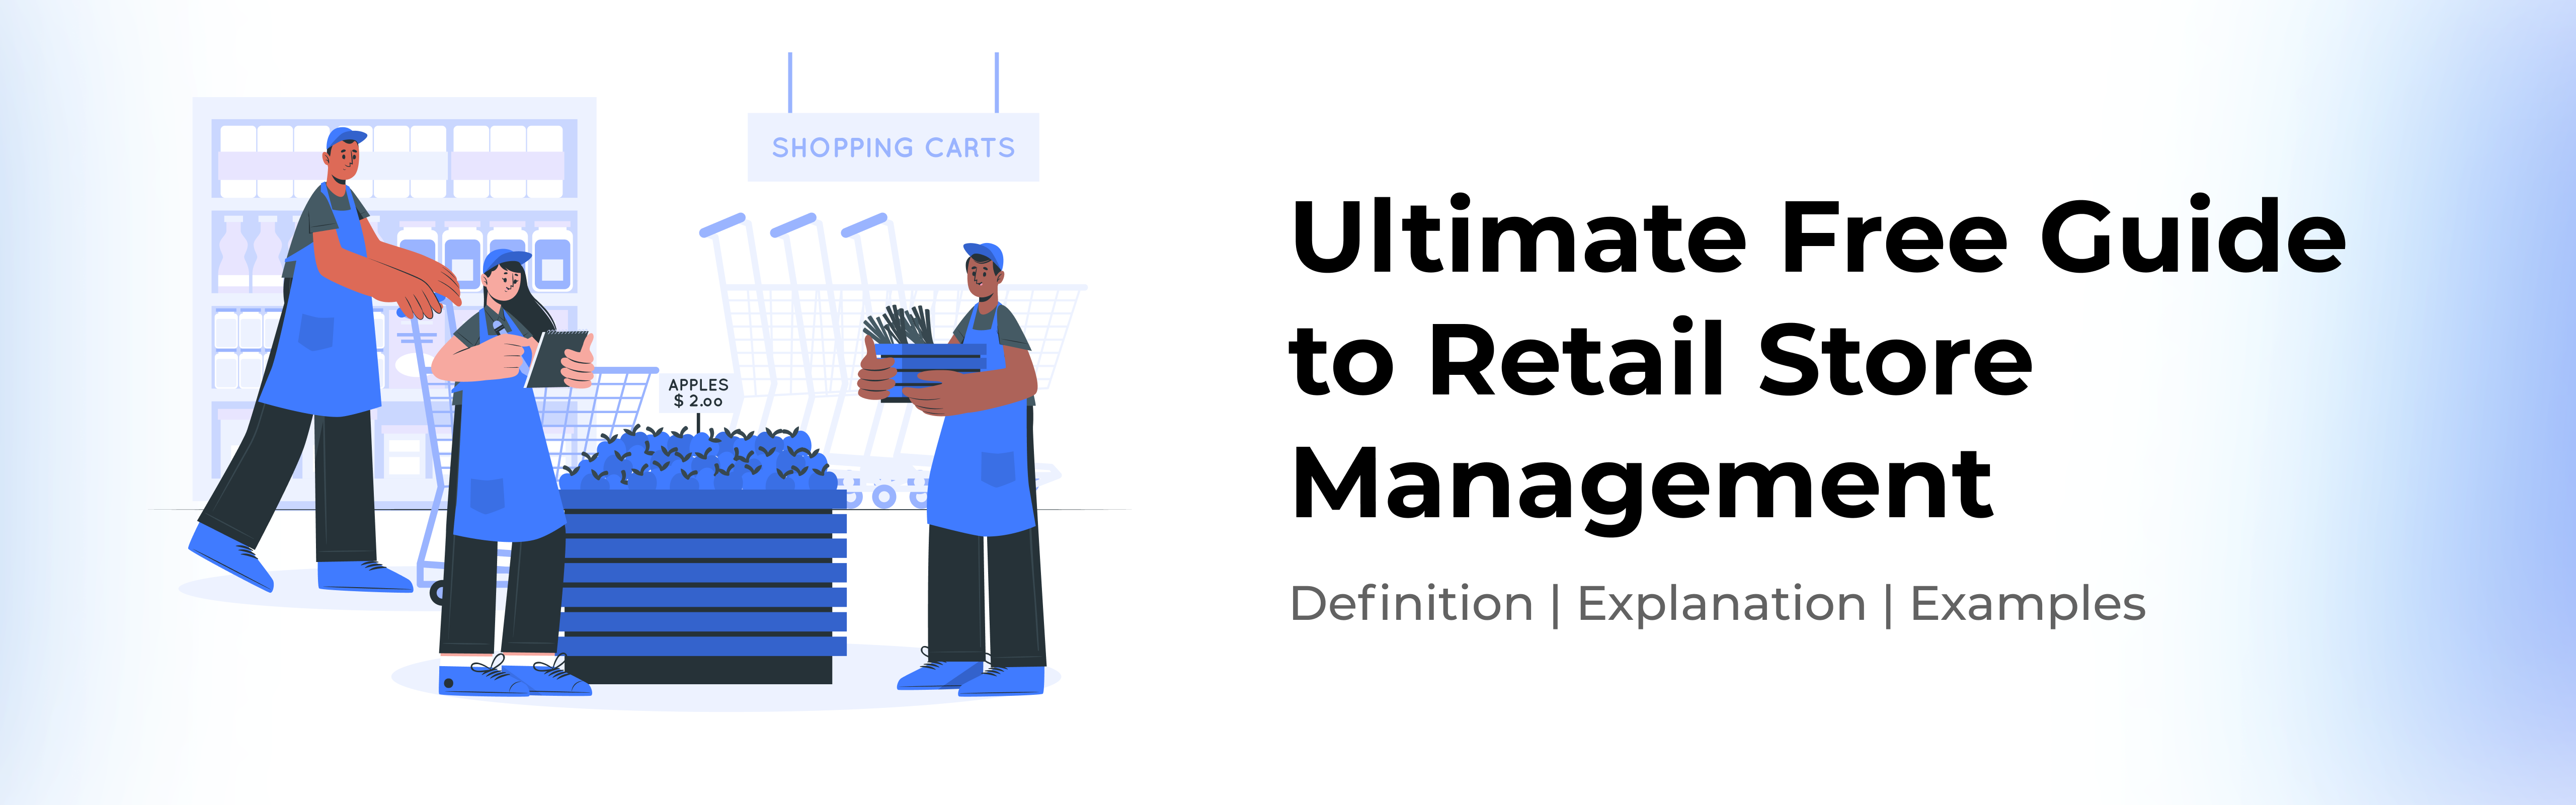 ultimate-free-guide-to-retail-store-management